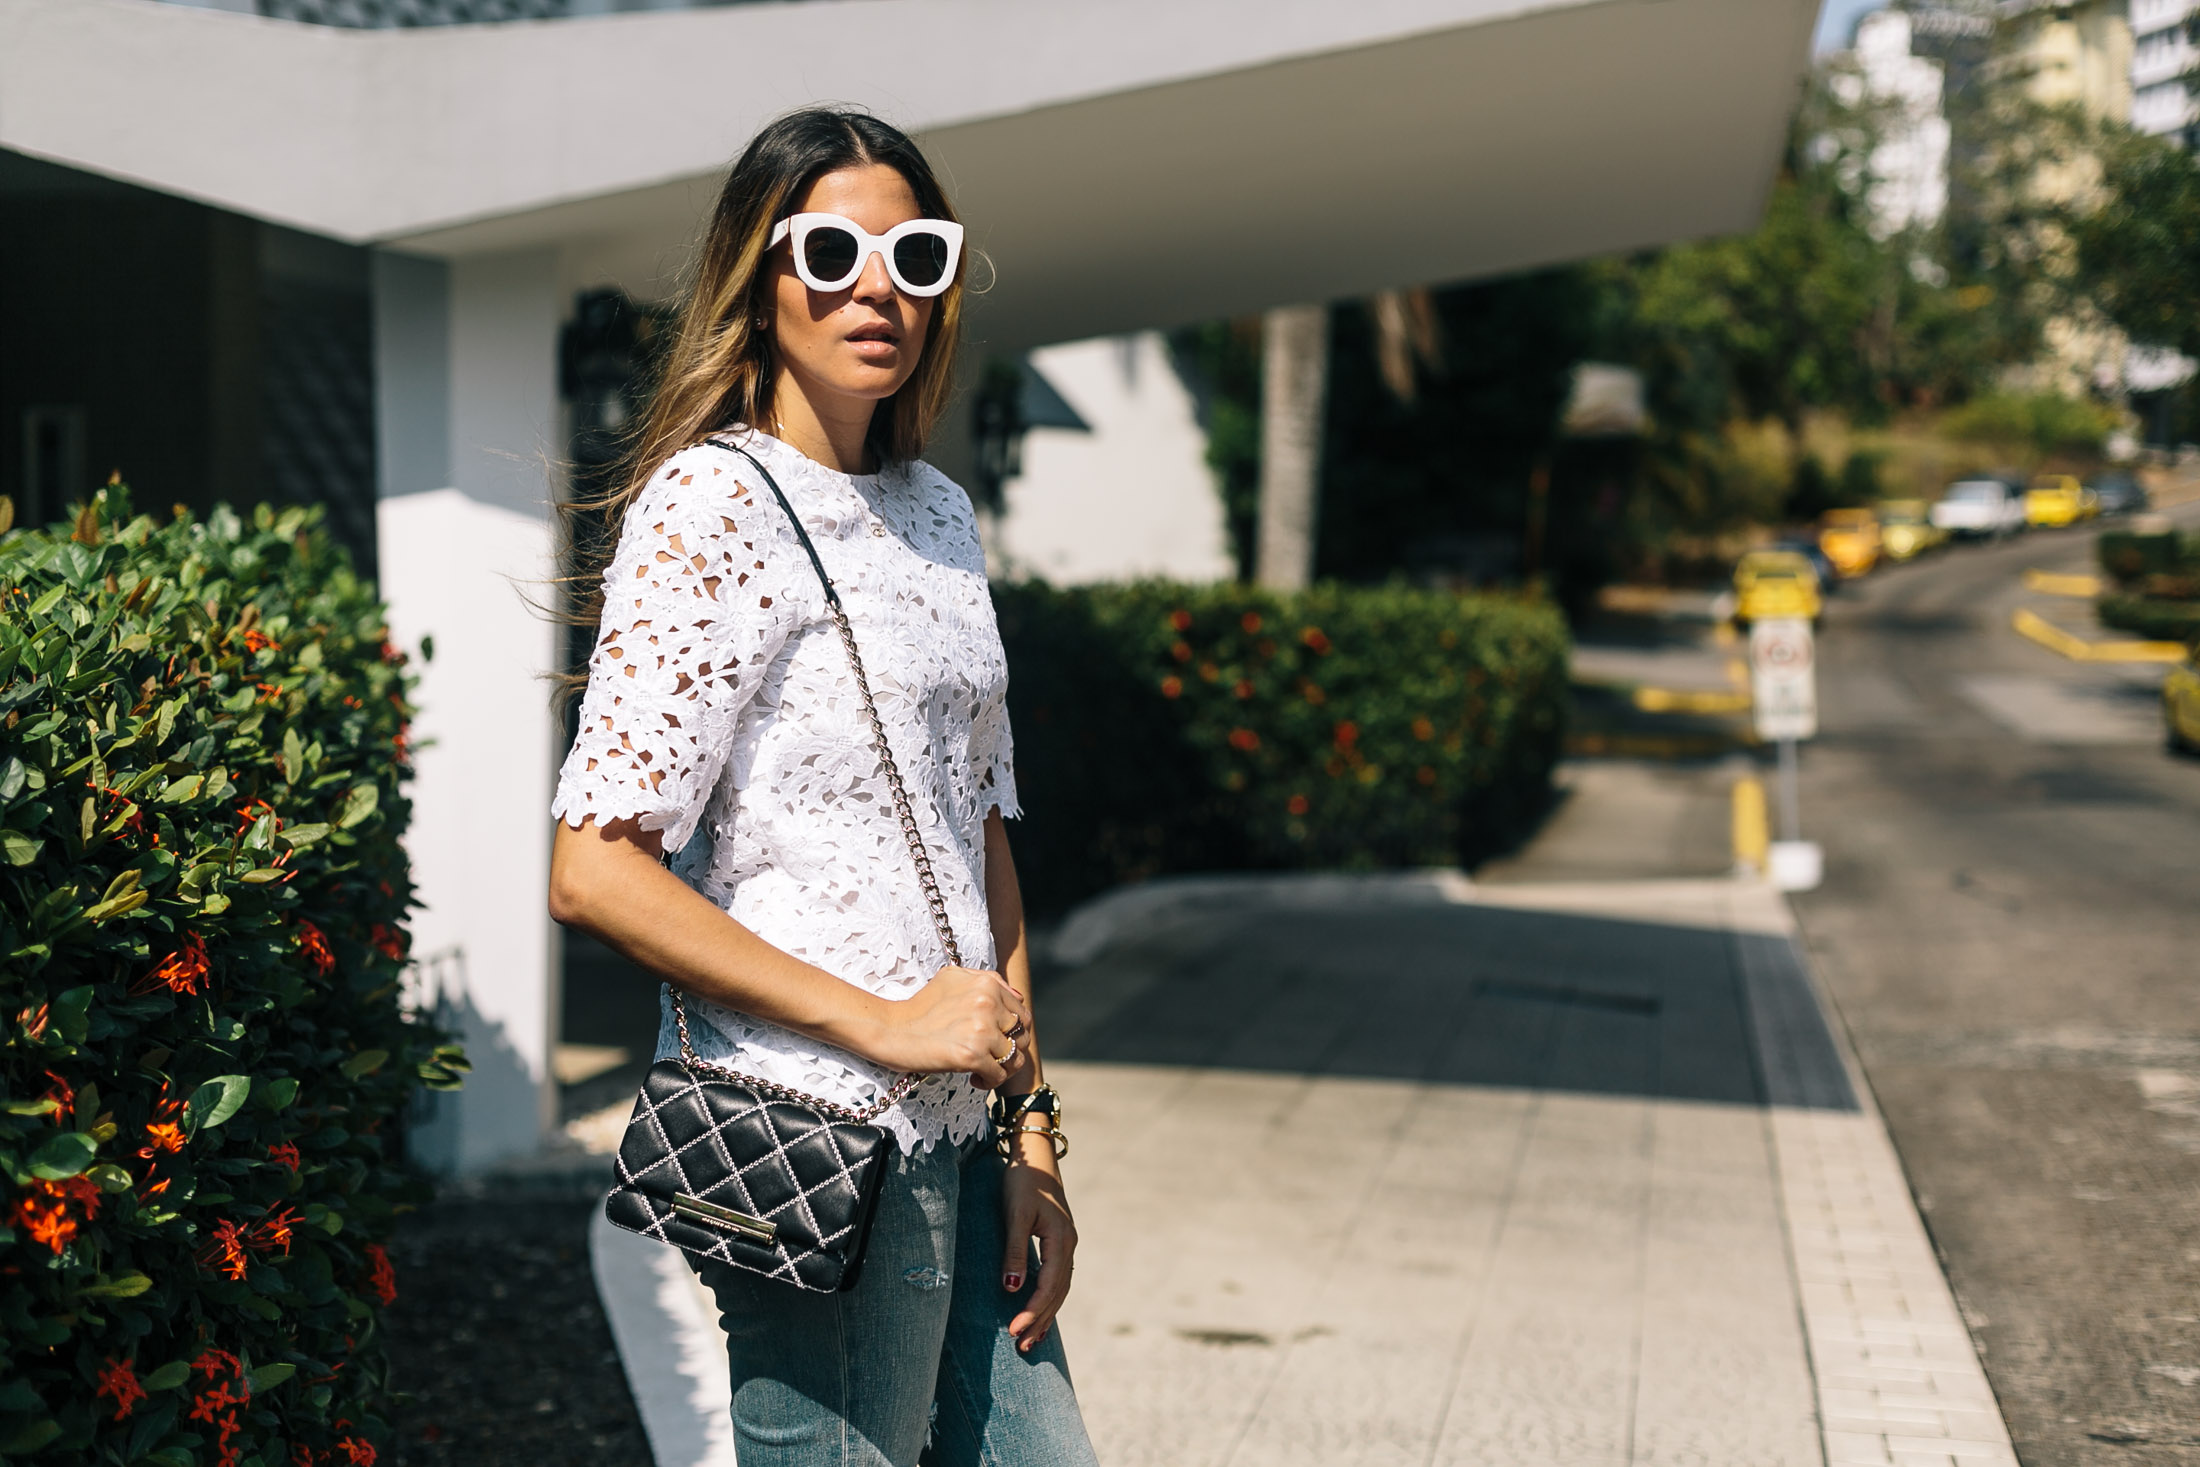 Casual everyday outfit idea with a fresh white lace top, jeans and small crossbody bag